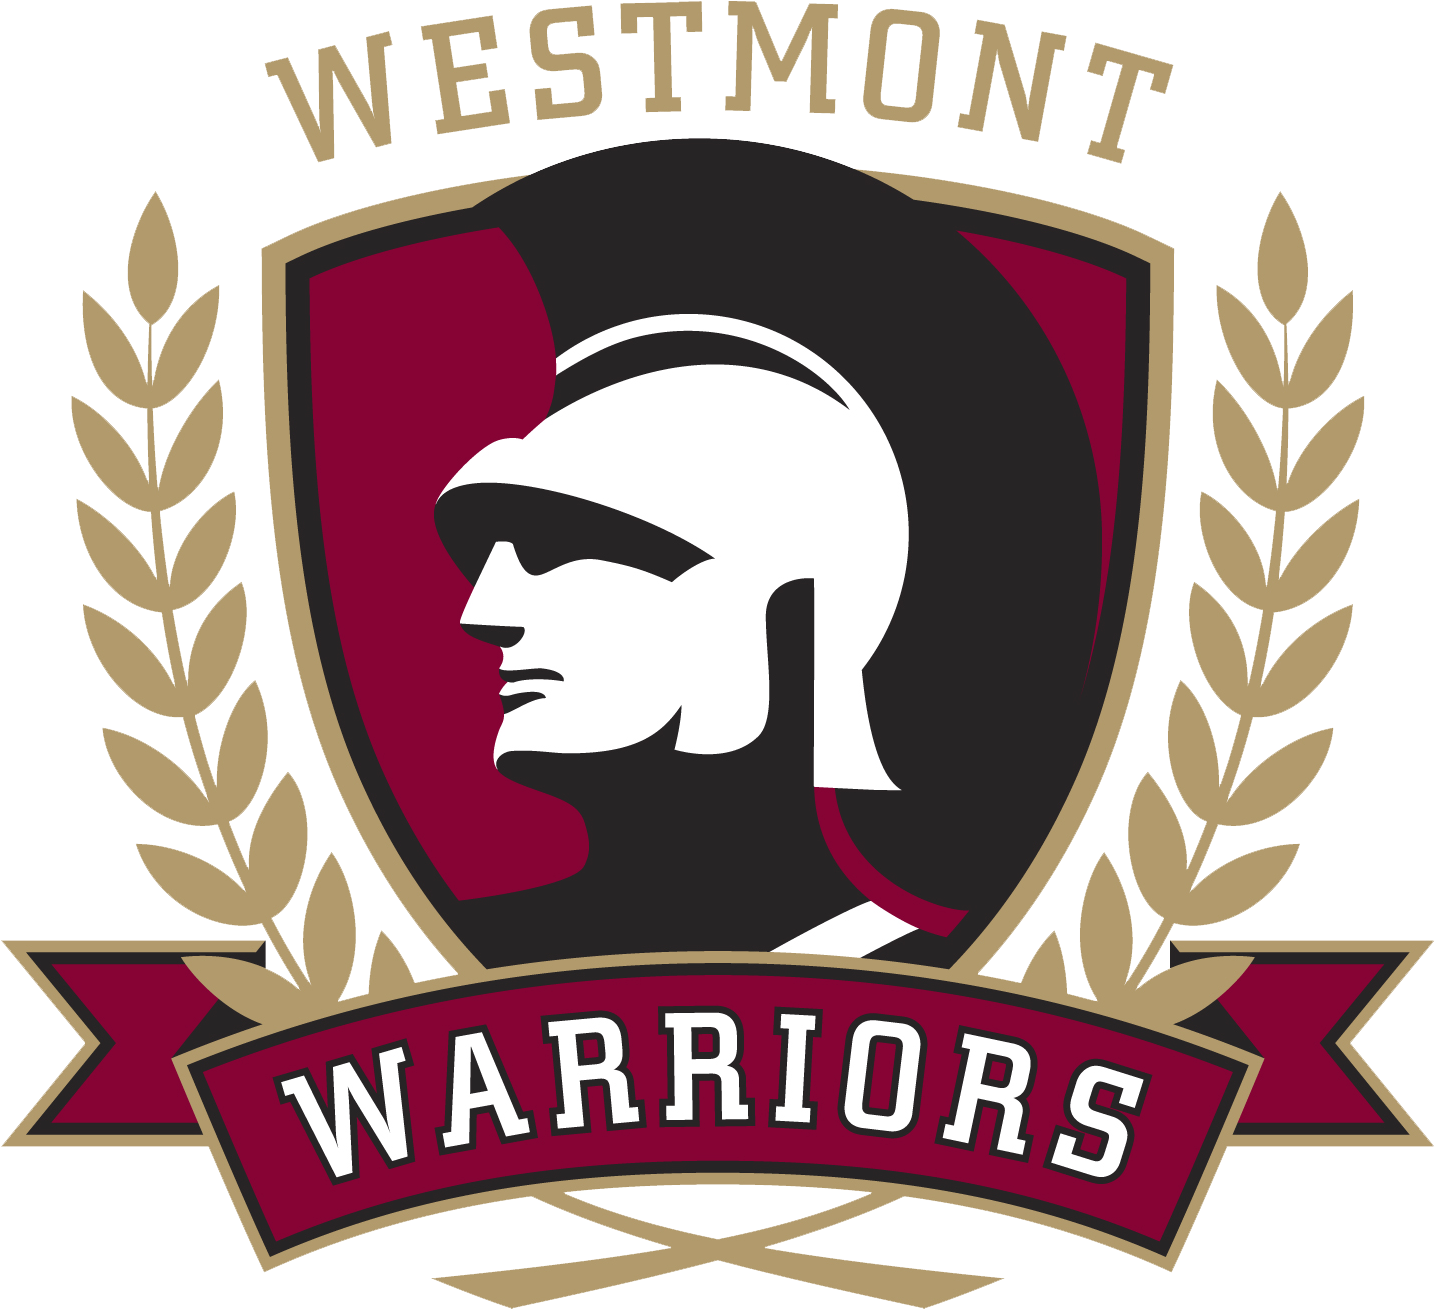 Upcoming Game & Recent Results - Westmont College Logo (1434x1434)